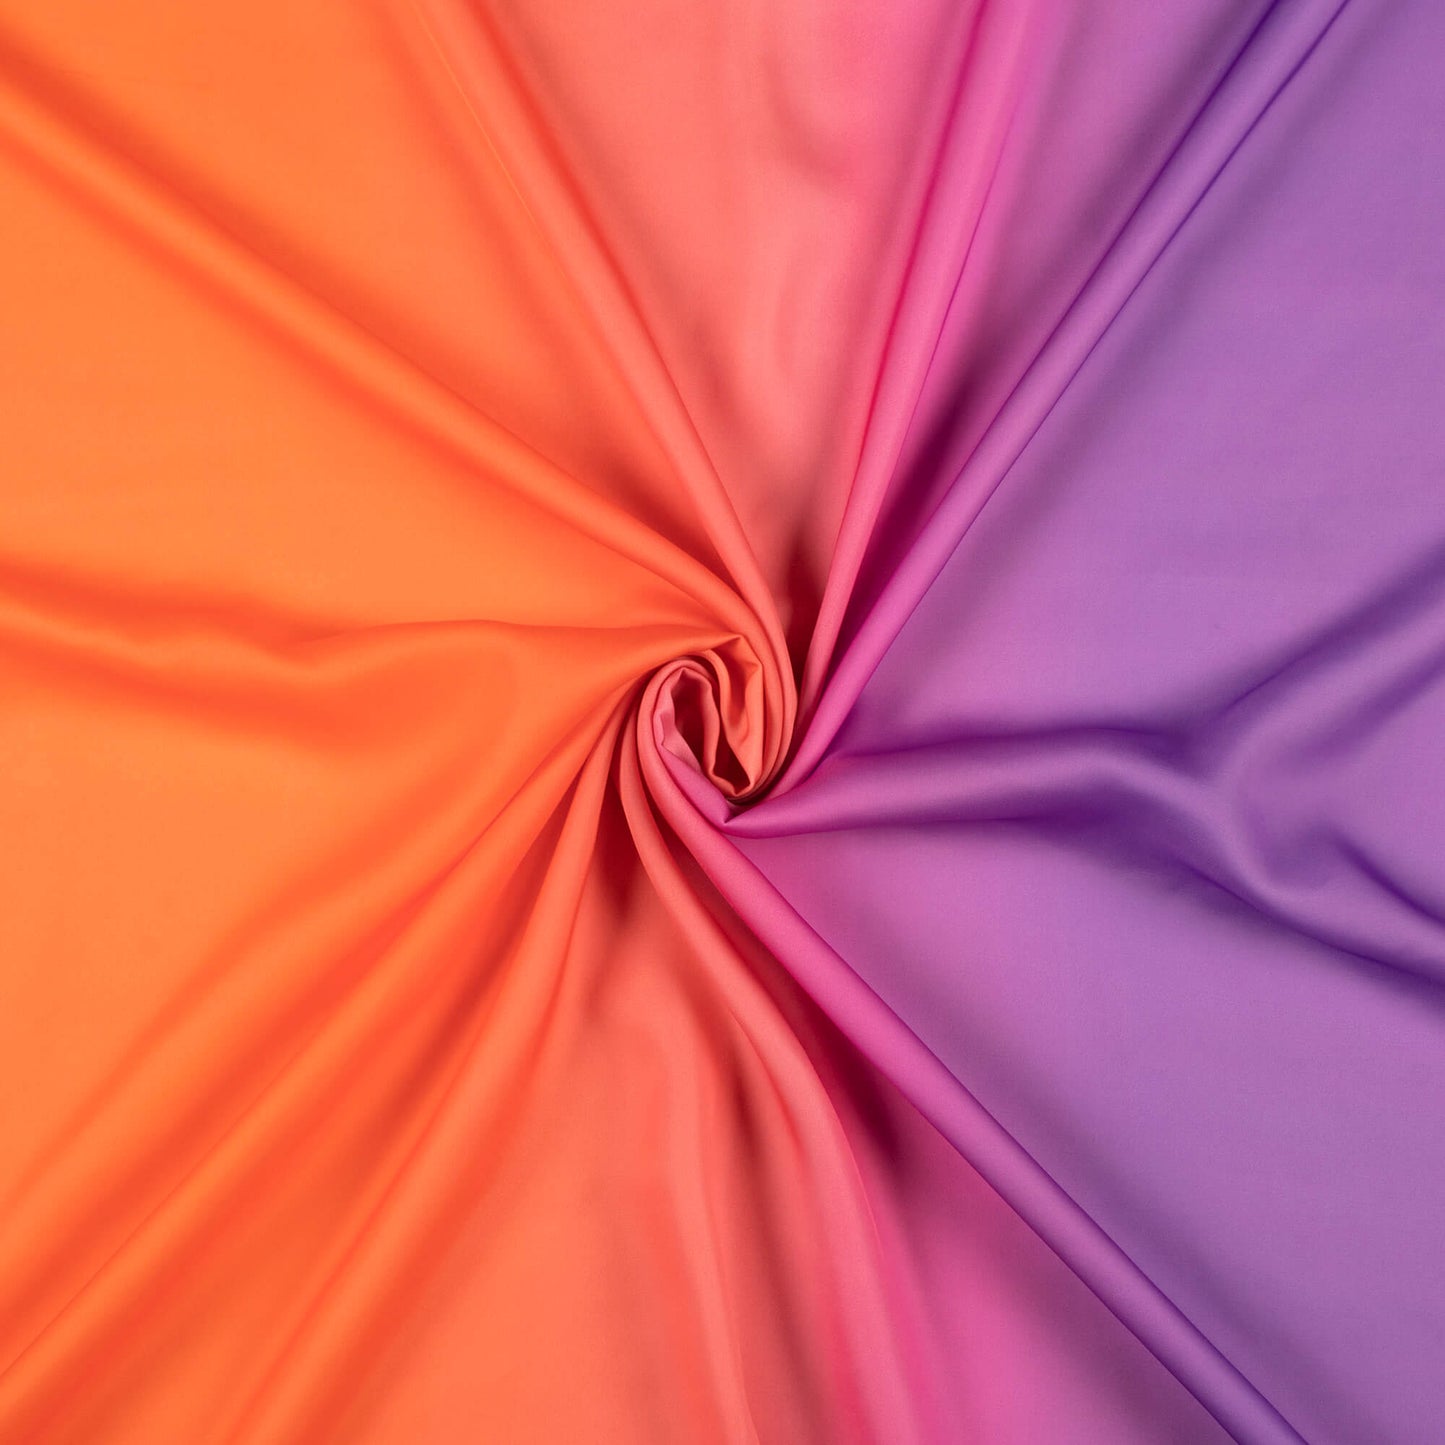 Royal Orange And Pink Ombre Digital Print Imported Satin Fabric